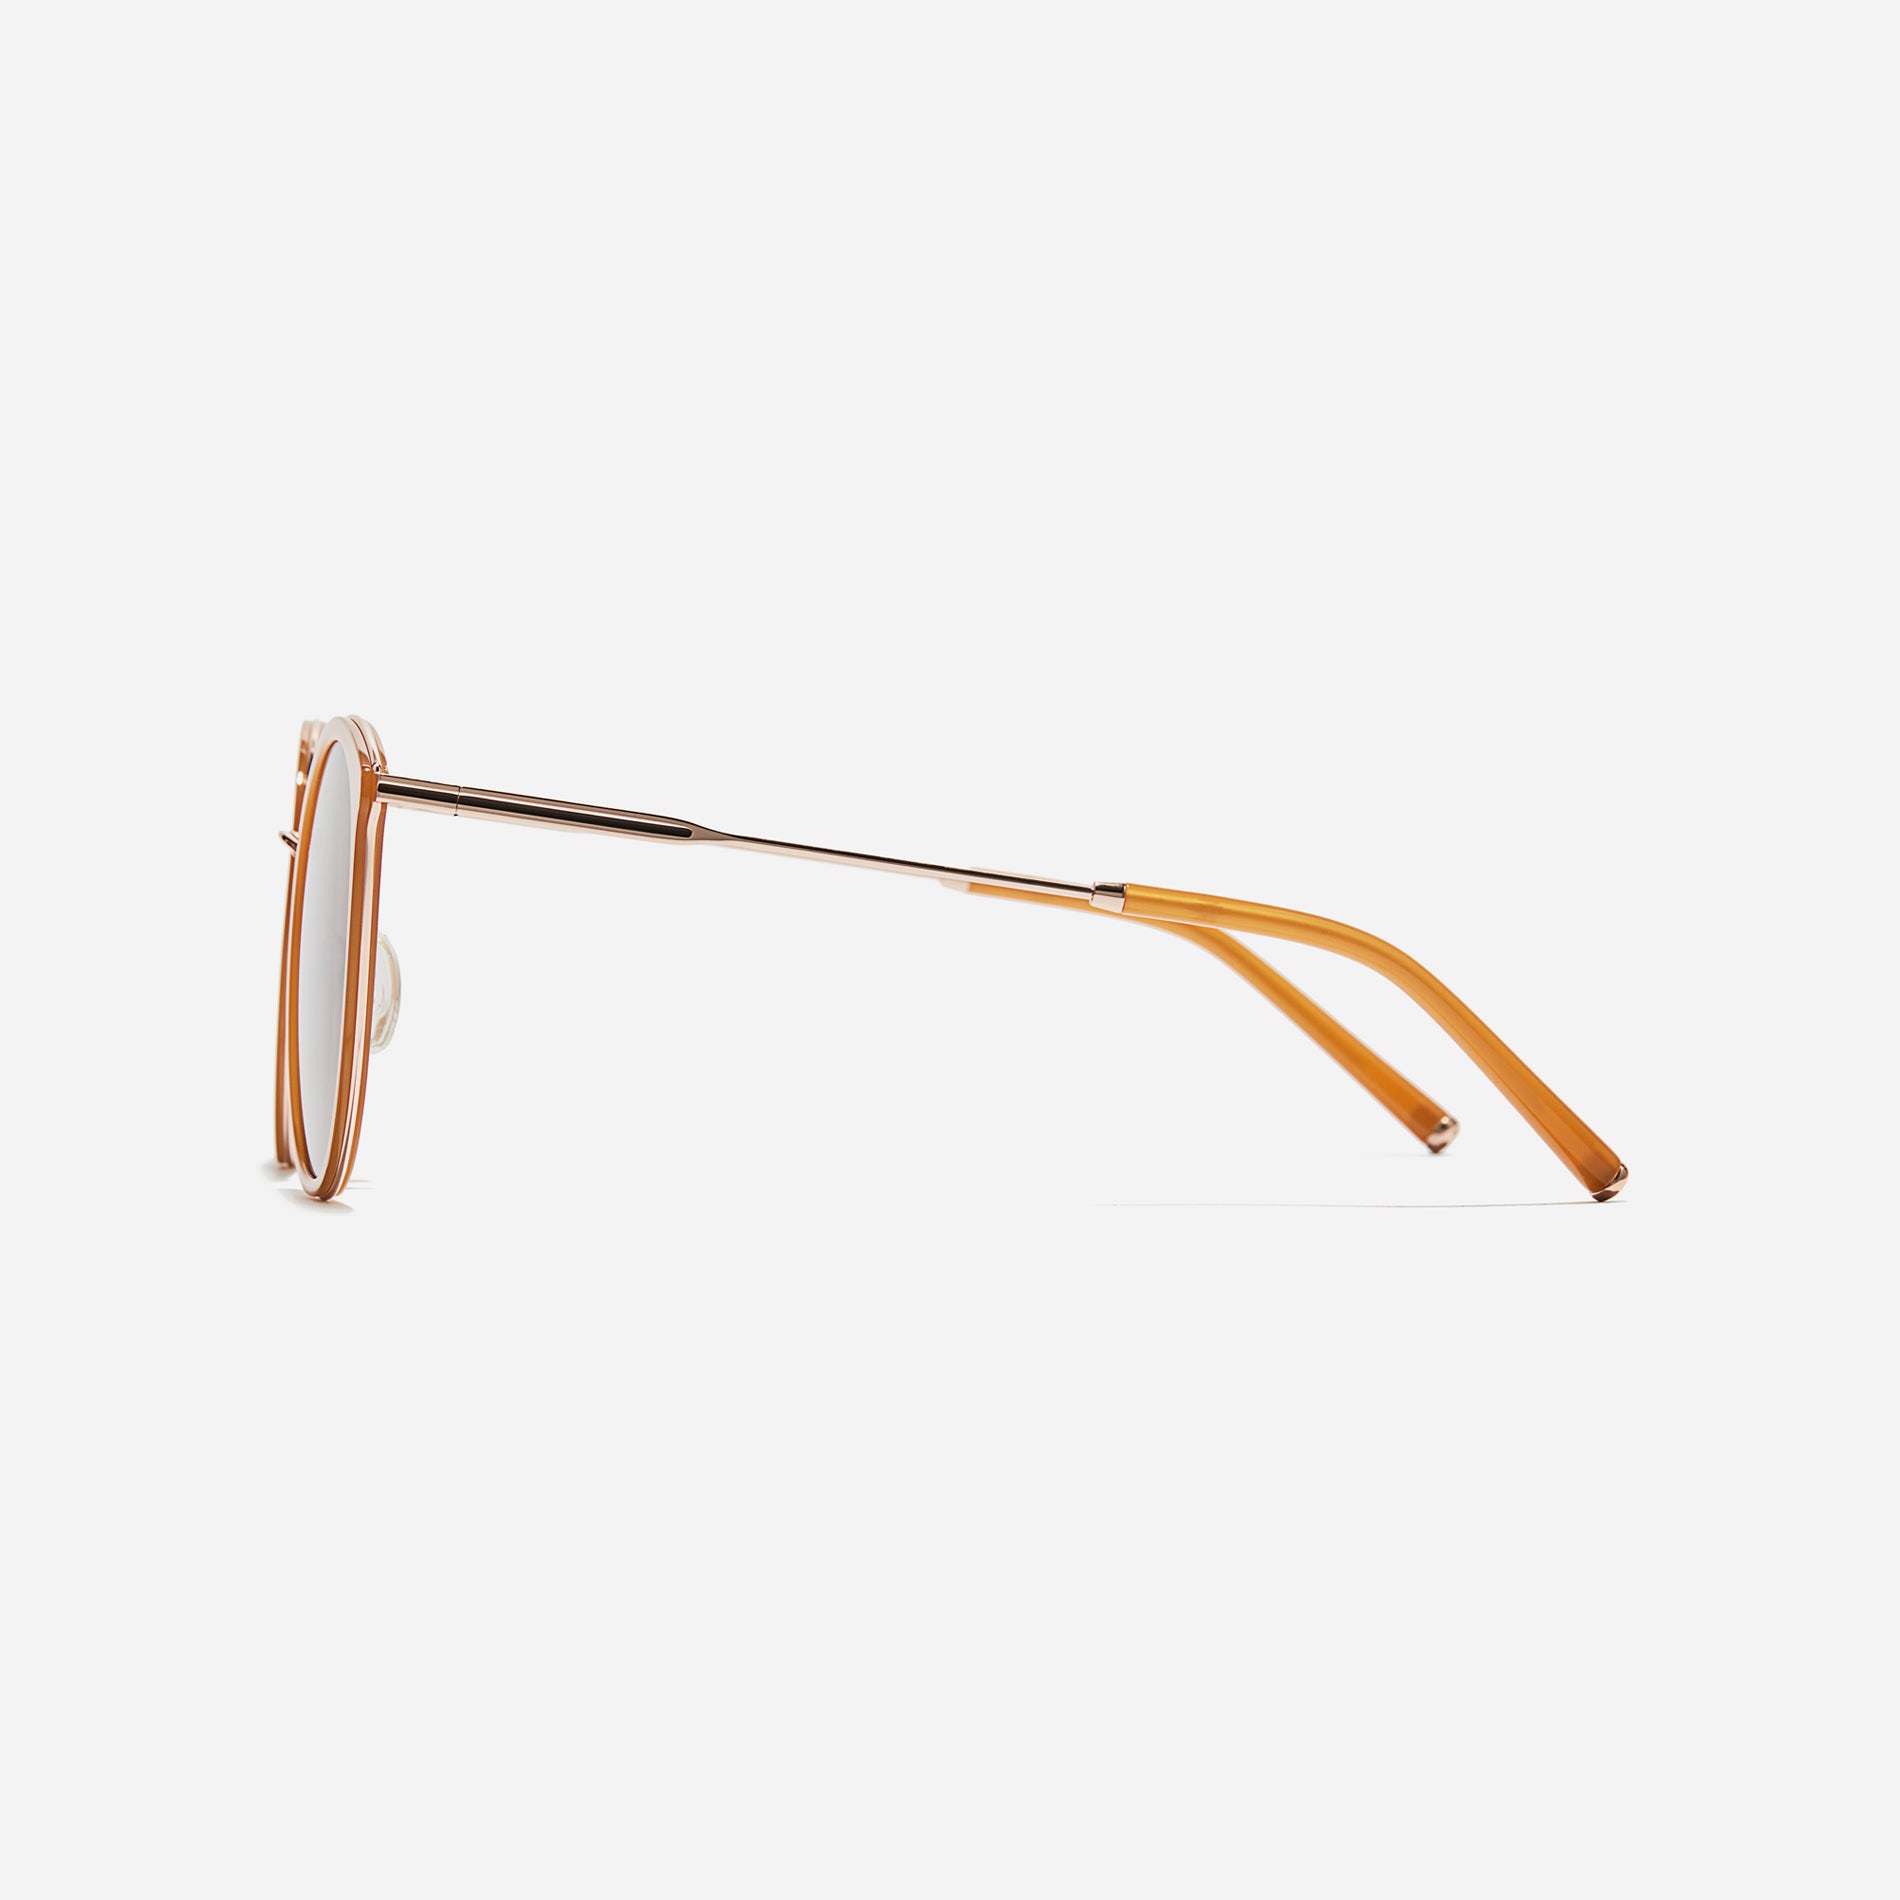 Round-shaped combination sunglasses, an enhanced version of CARIN's bestseller - Madeleine. They feature flat lenses that provide 100% UV protection and distinctive nose bridge details. 